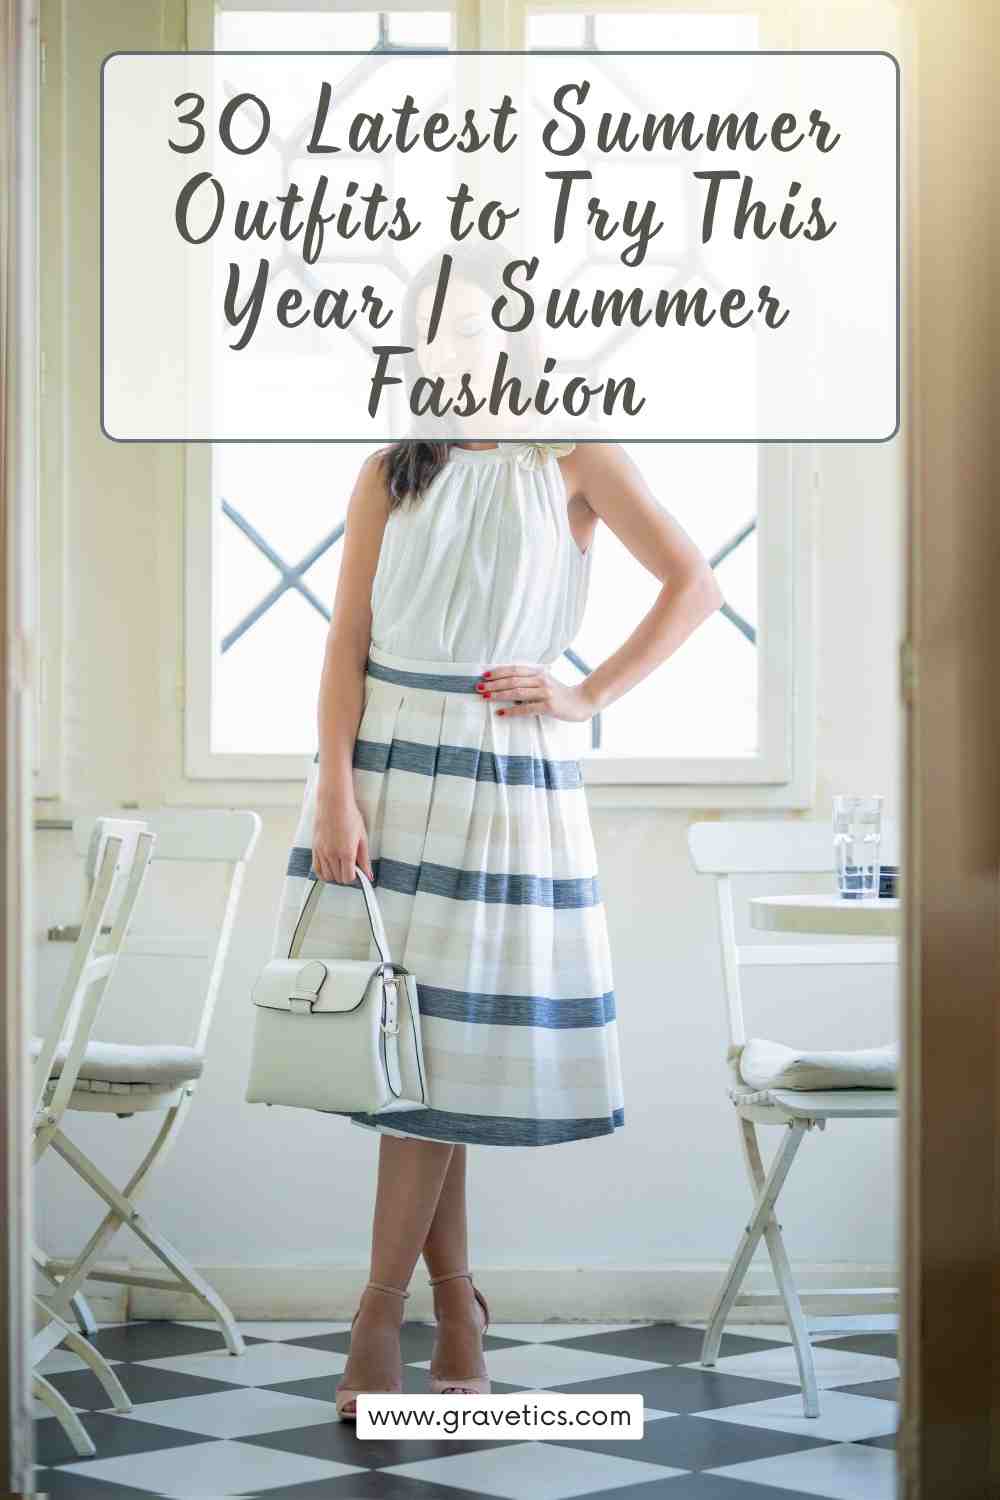 30 Latest Summer Outfits to Try This Year